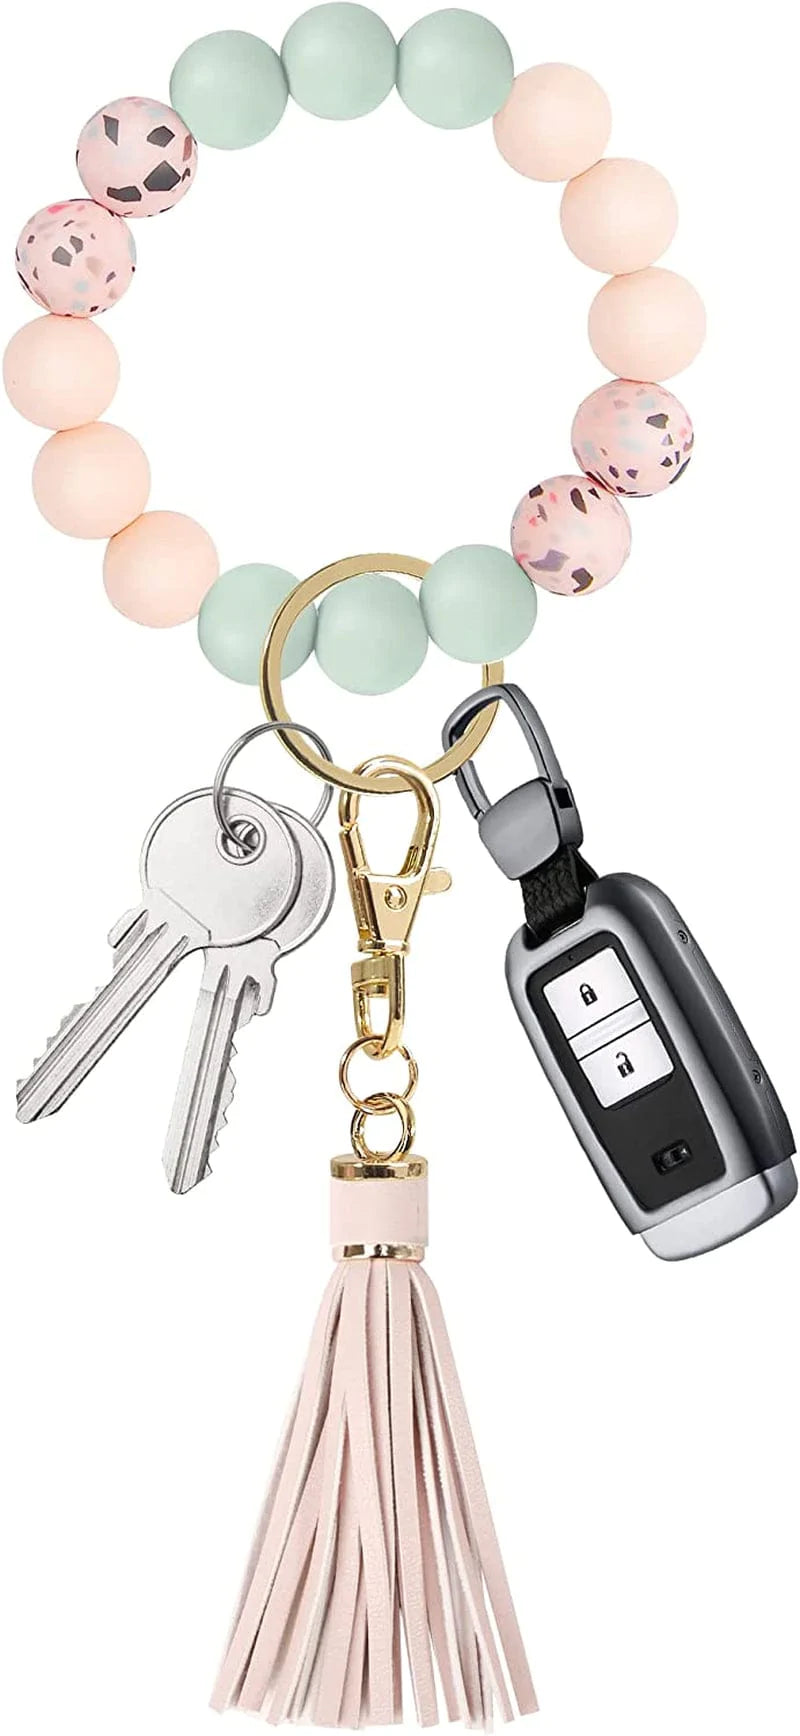 YUOROS Keychains for Women Car Key Chain Ring Bracelet Wristlet Sporting Goods > Outdoor Recreation > Winter Sports & Activities YUOROS Camouflage Pink  